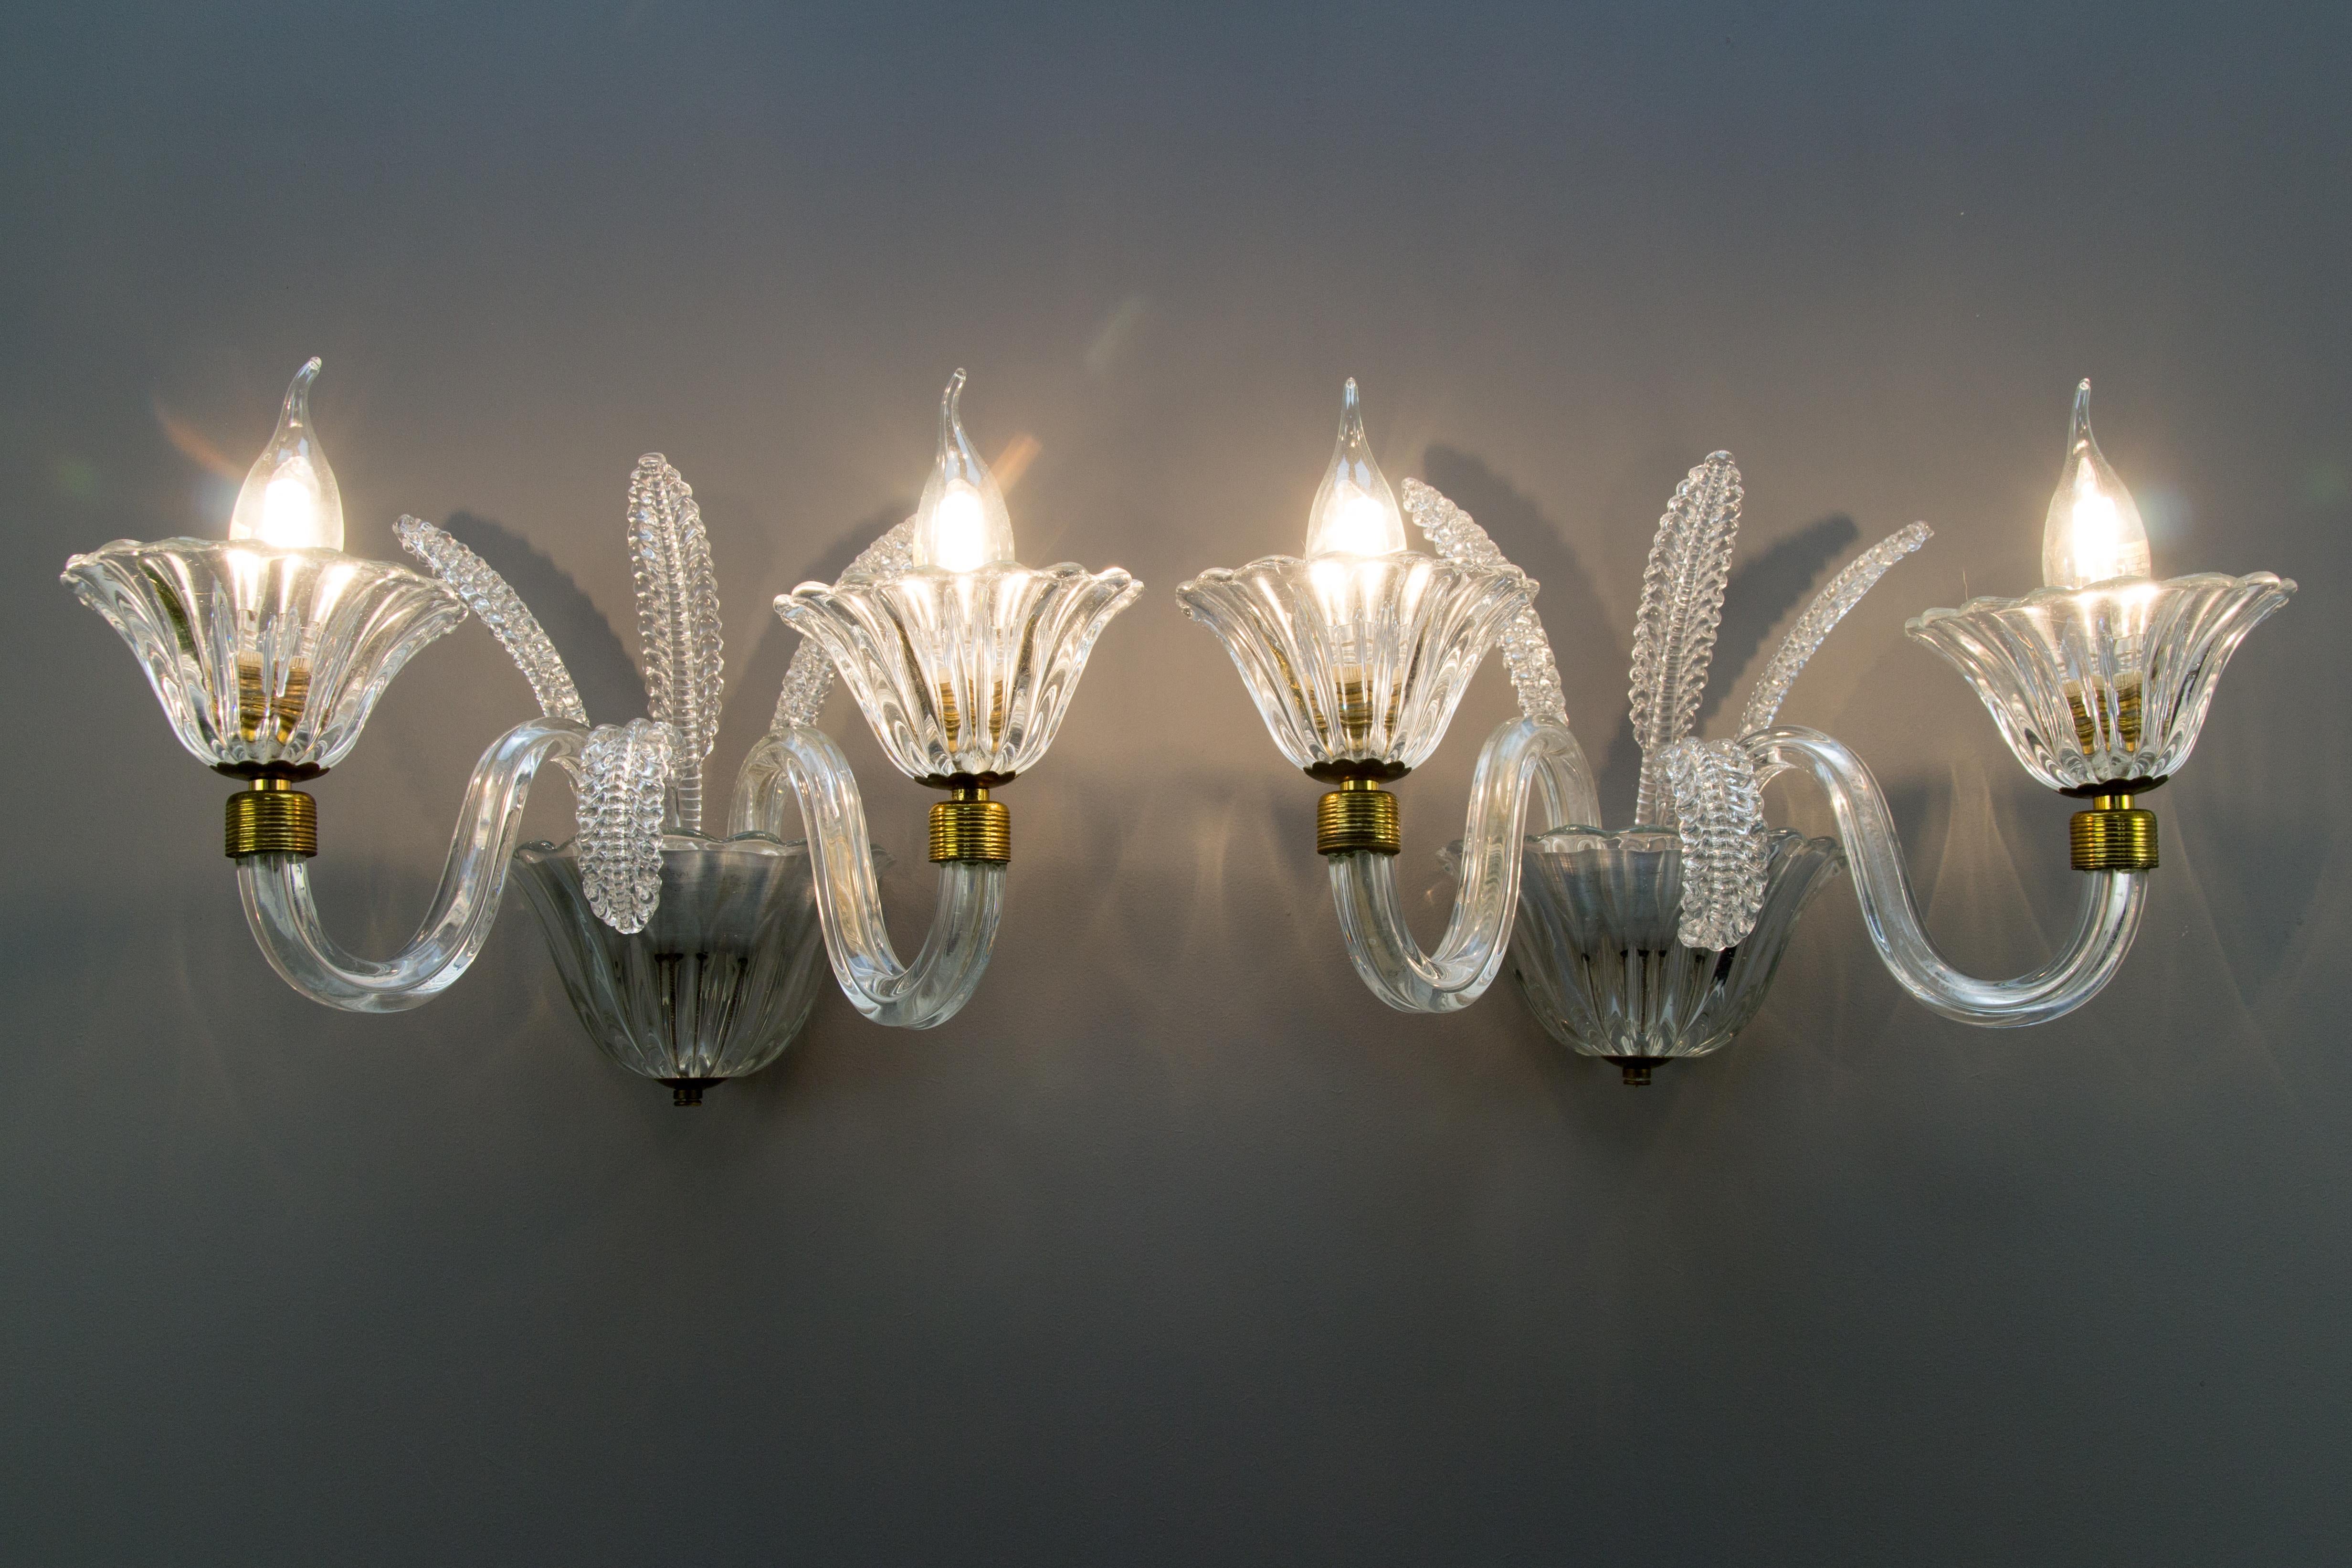 Pair of beautiful Italian Murano glass sconces, clear glass. Each sconce has two branches with sockets for E 14 size light bulbs.
Dimensions:
Height 24 cm / 9.44 in, width 40 cm / 15.74 in, depth 26 cm / 10.23 in.